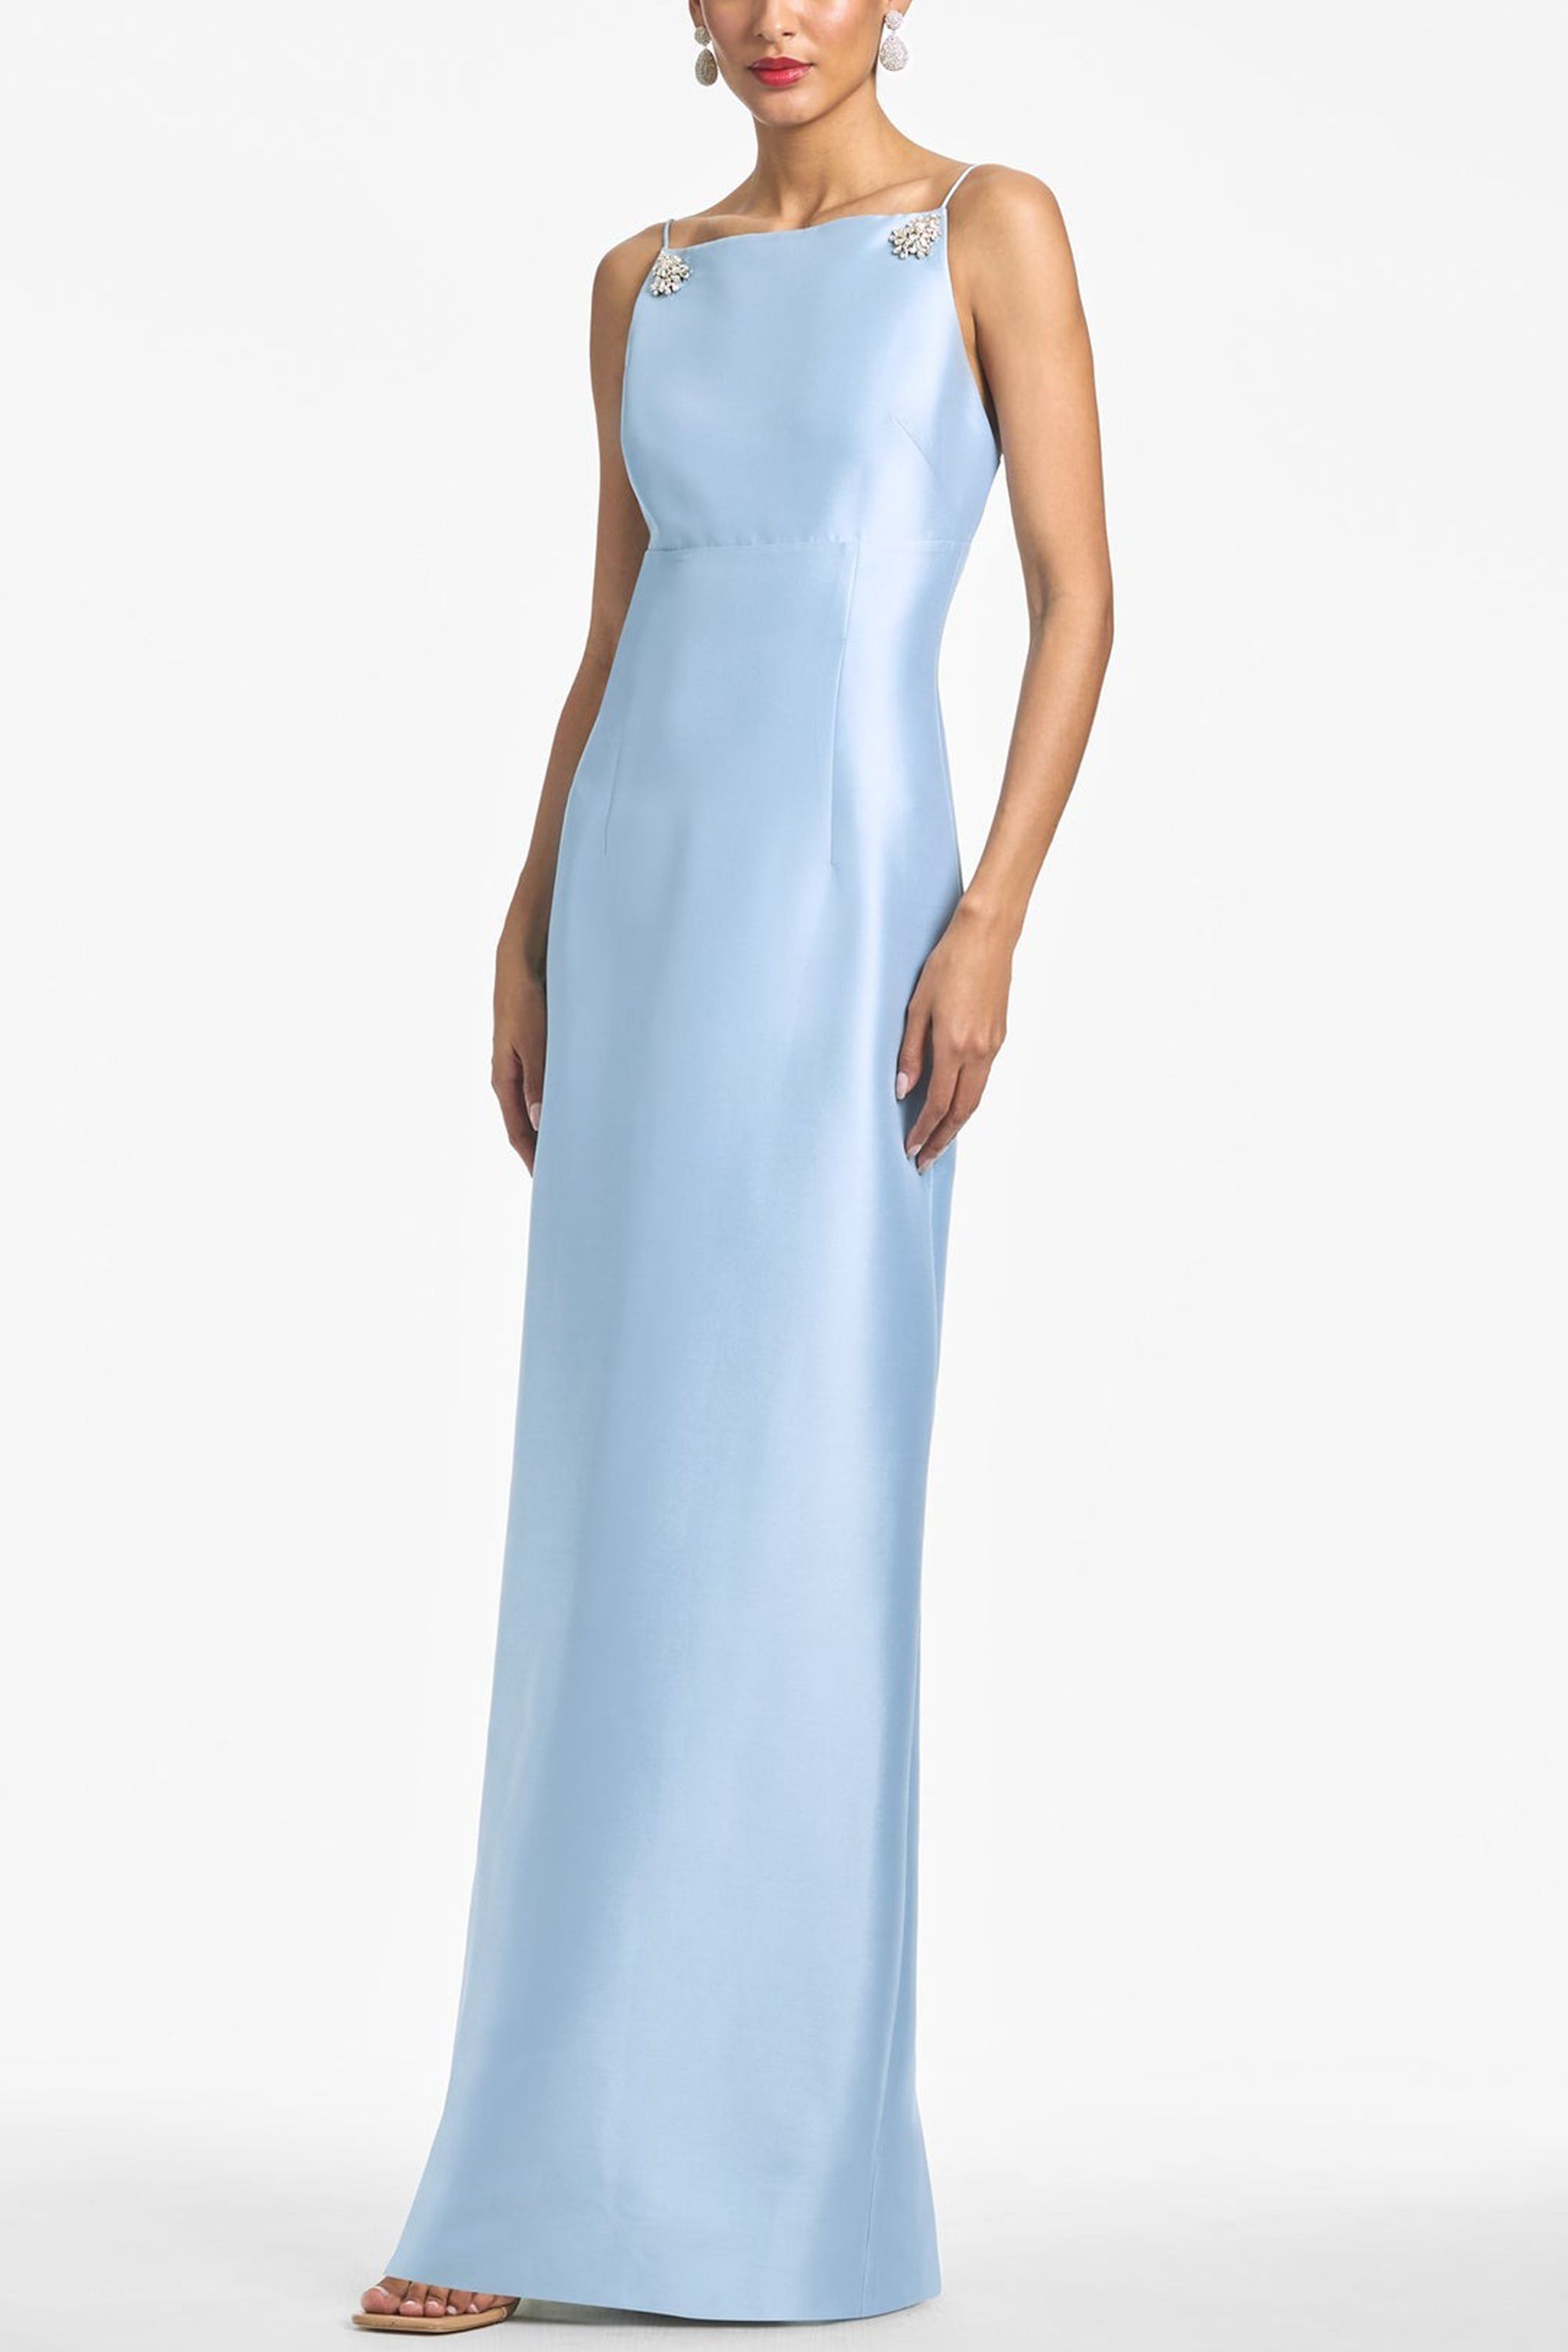 Pryce Satin-Finish Gown